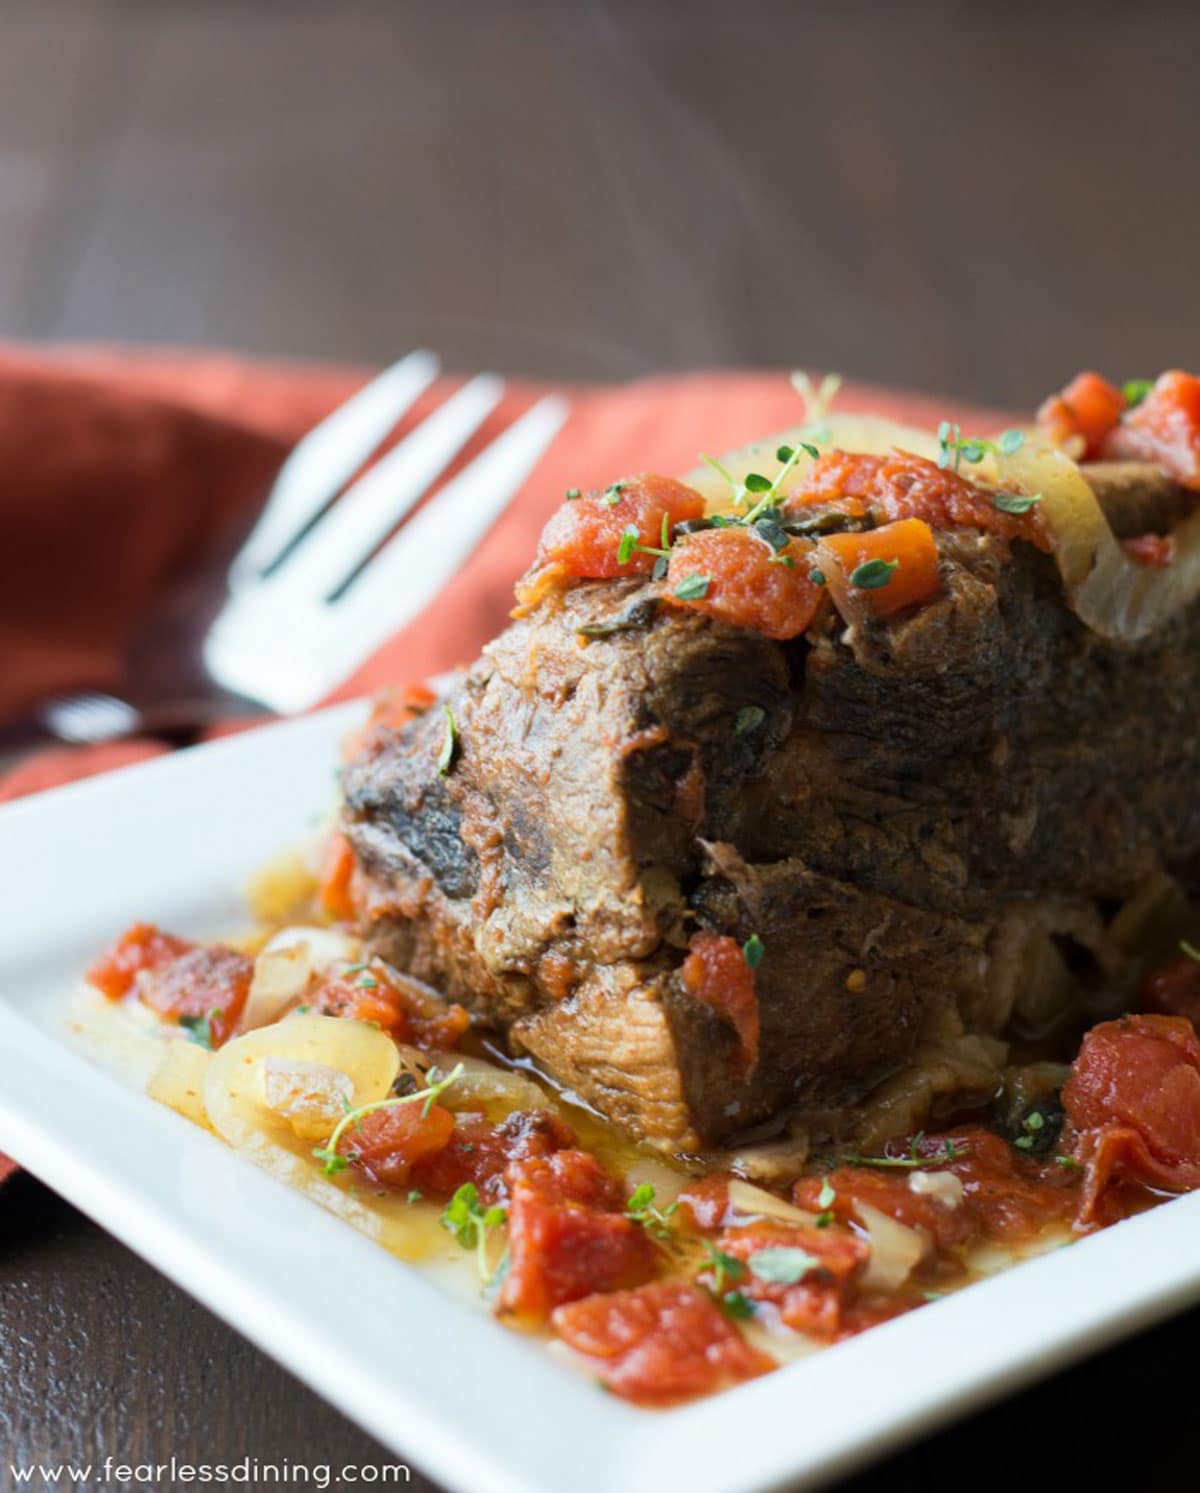 A large platter with a large pot roast on it.